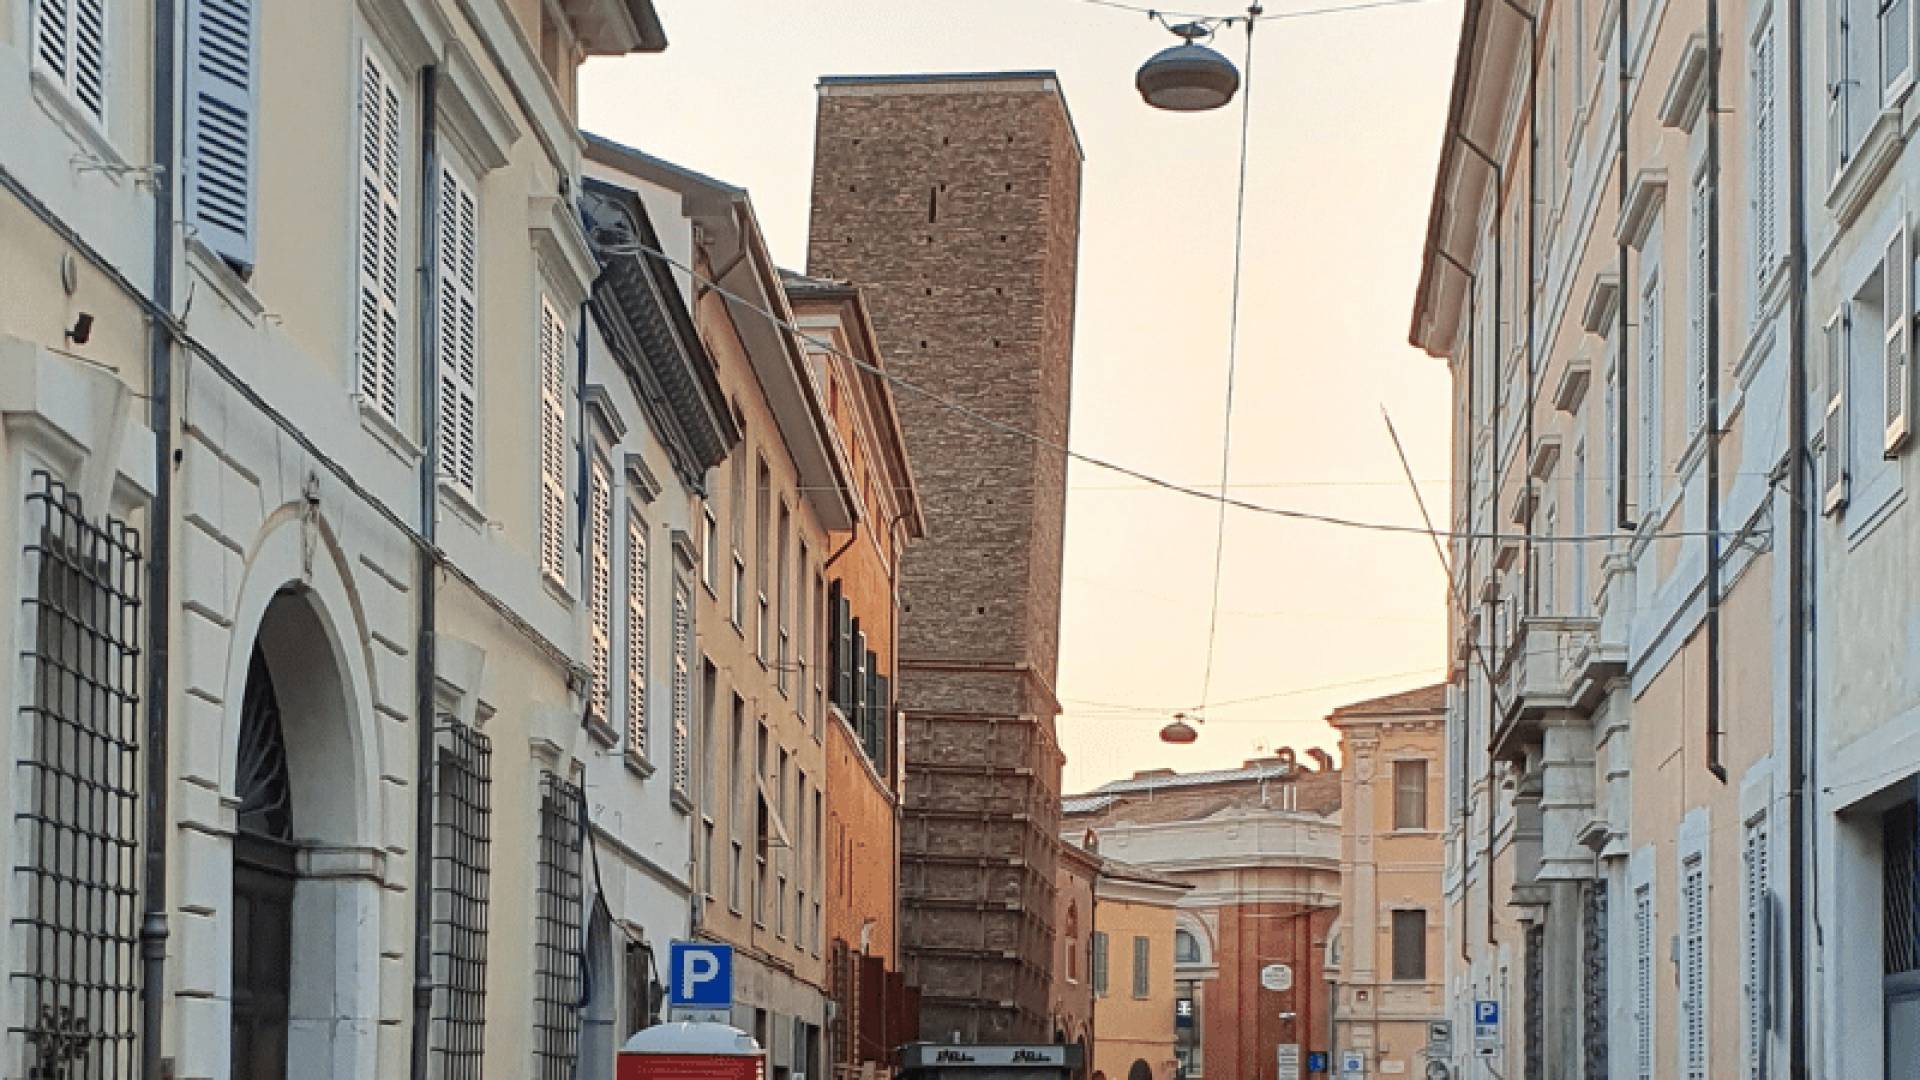 LEANING CIVIC TOWER, Presentation